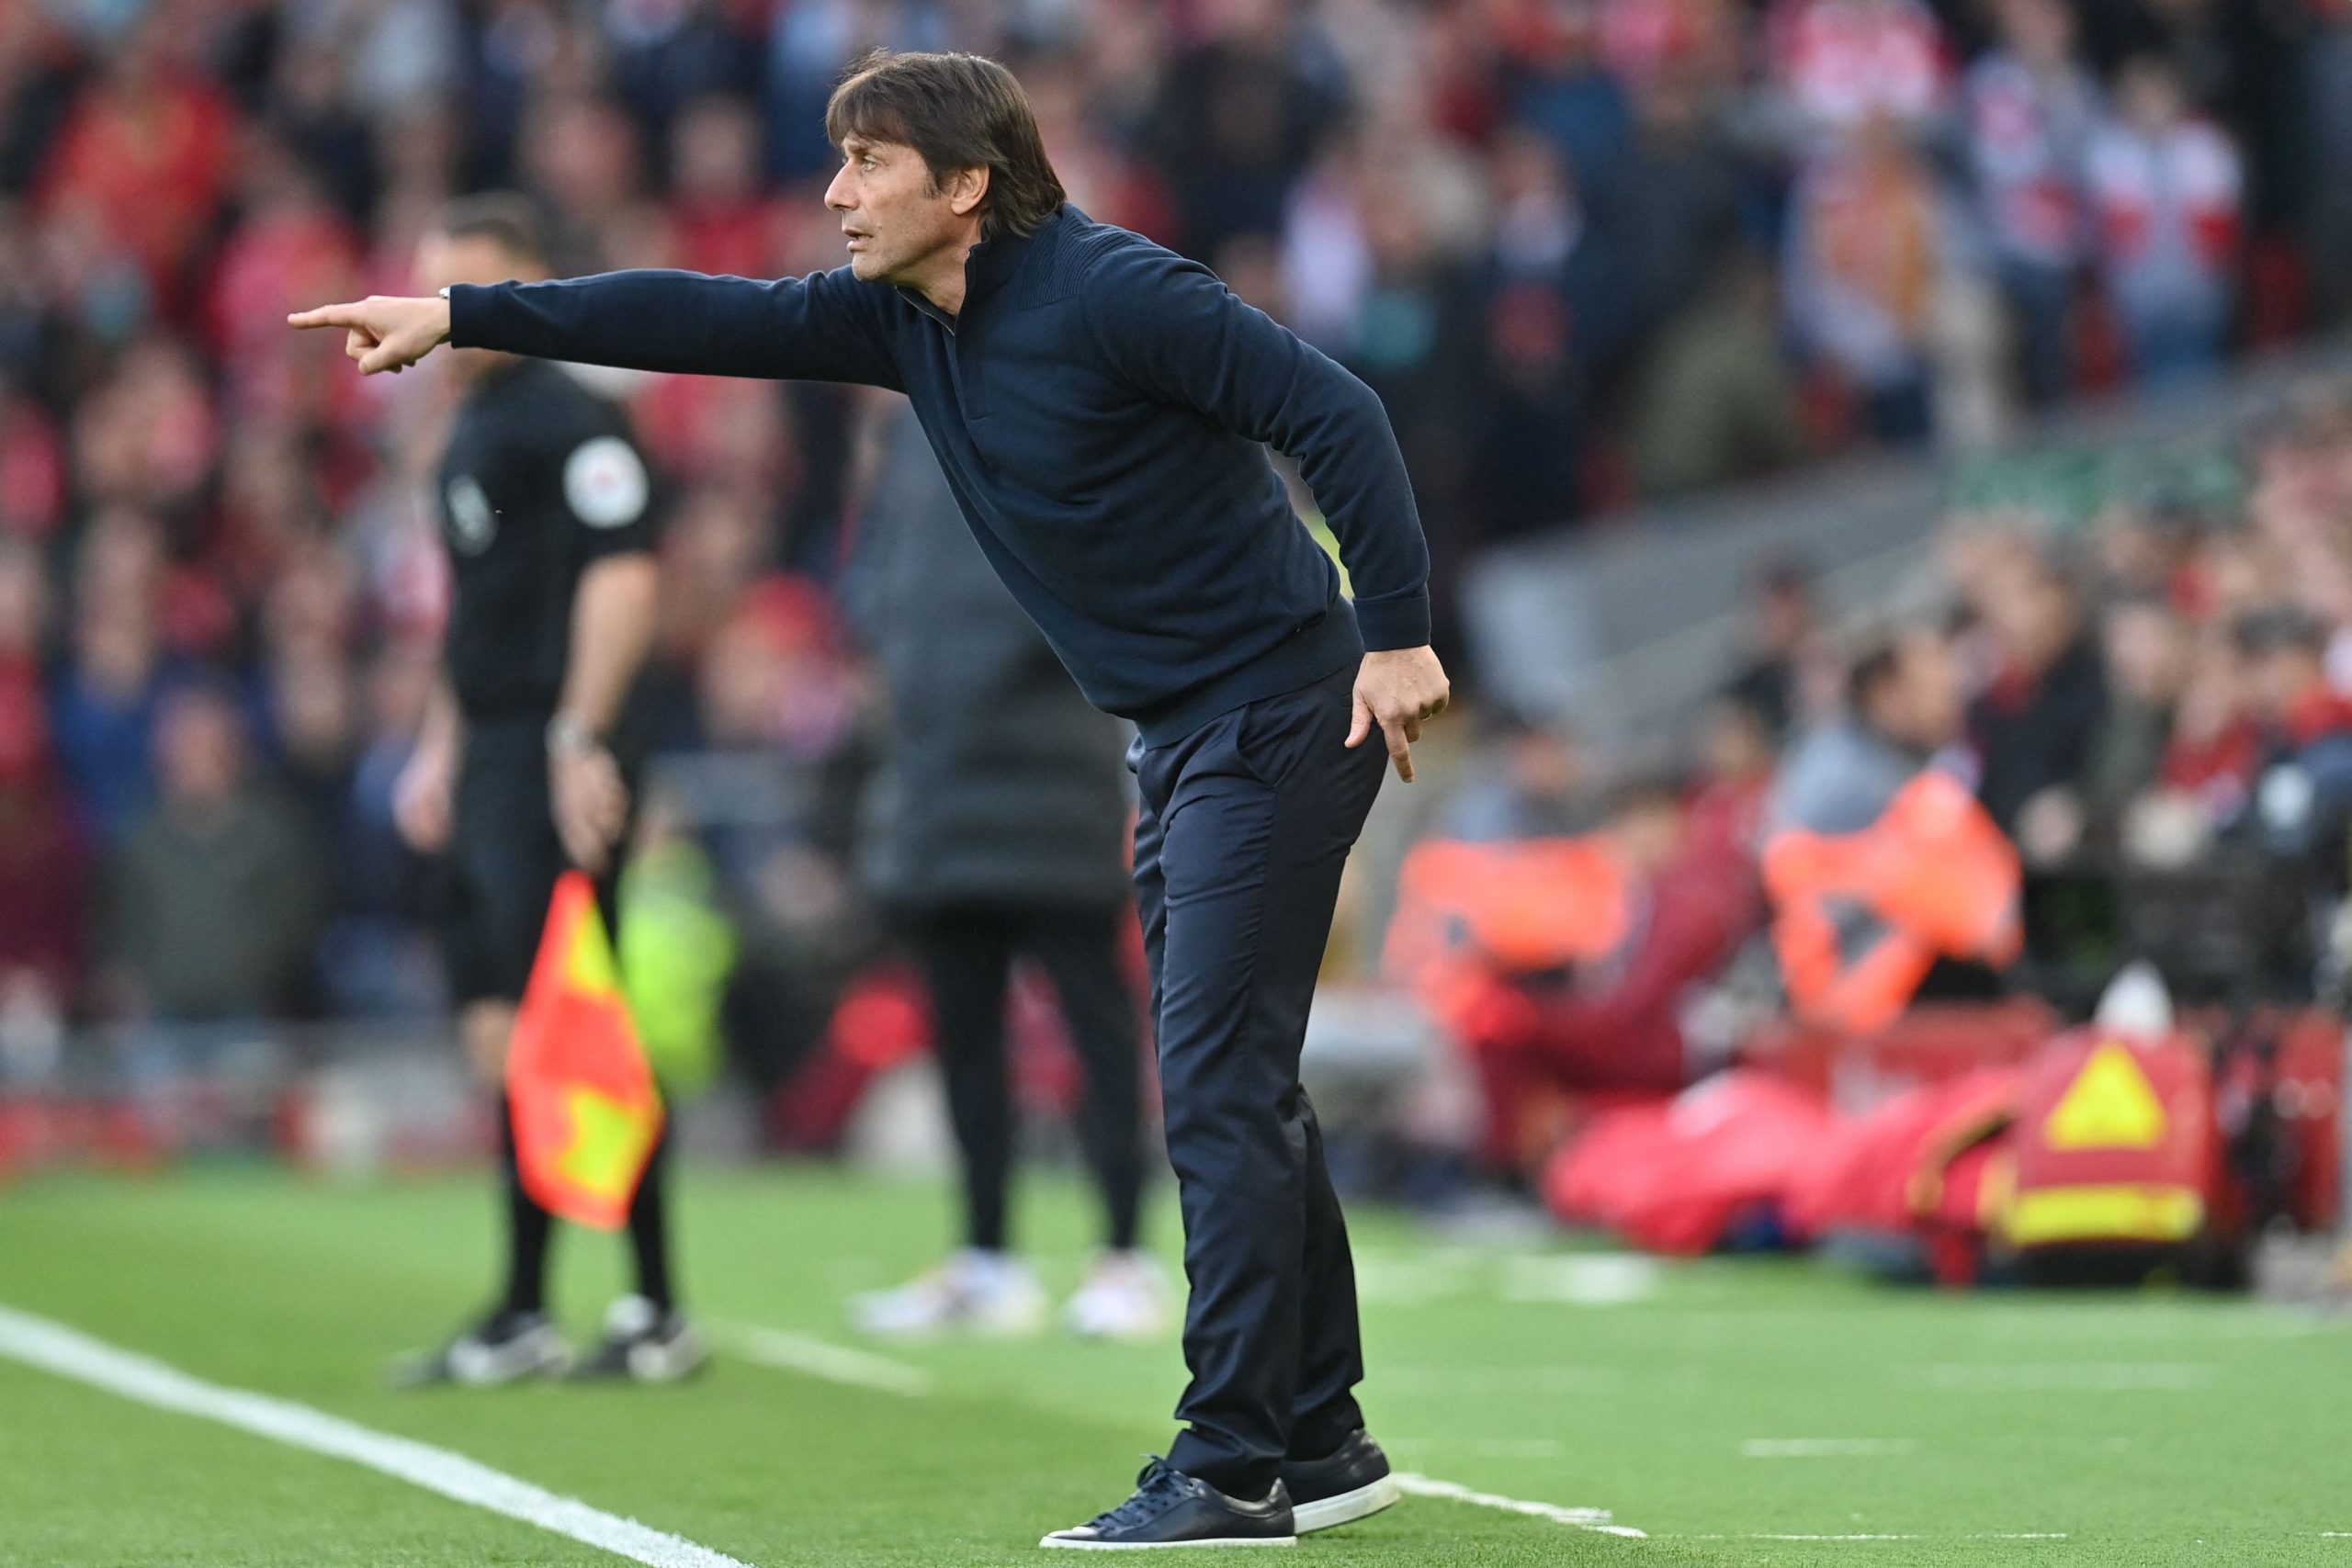 Antonio Conte urges Tottenham Hotspur players to cut down on mistakes following UCL loss to Sporting CP.